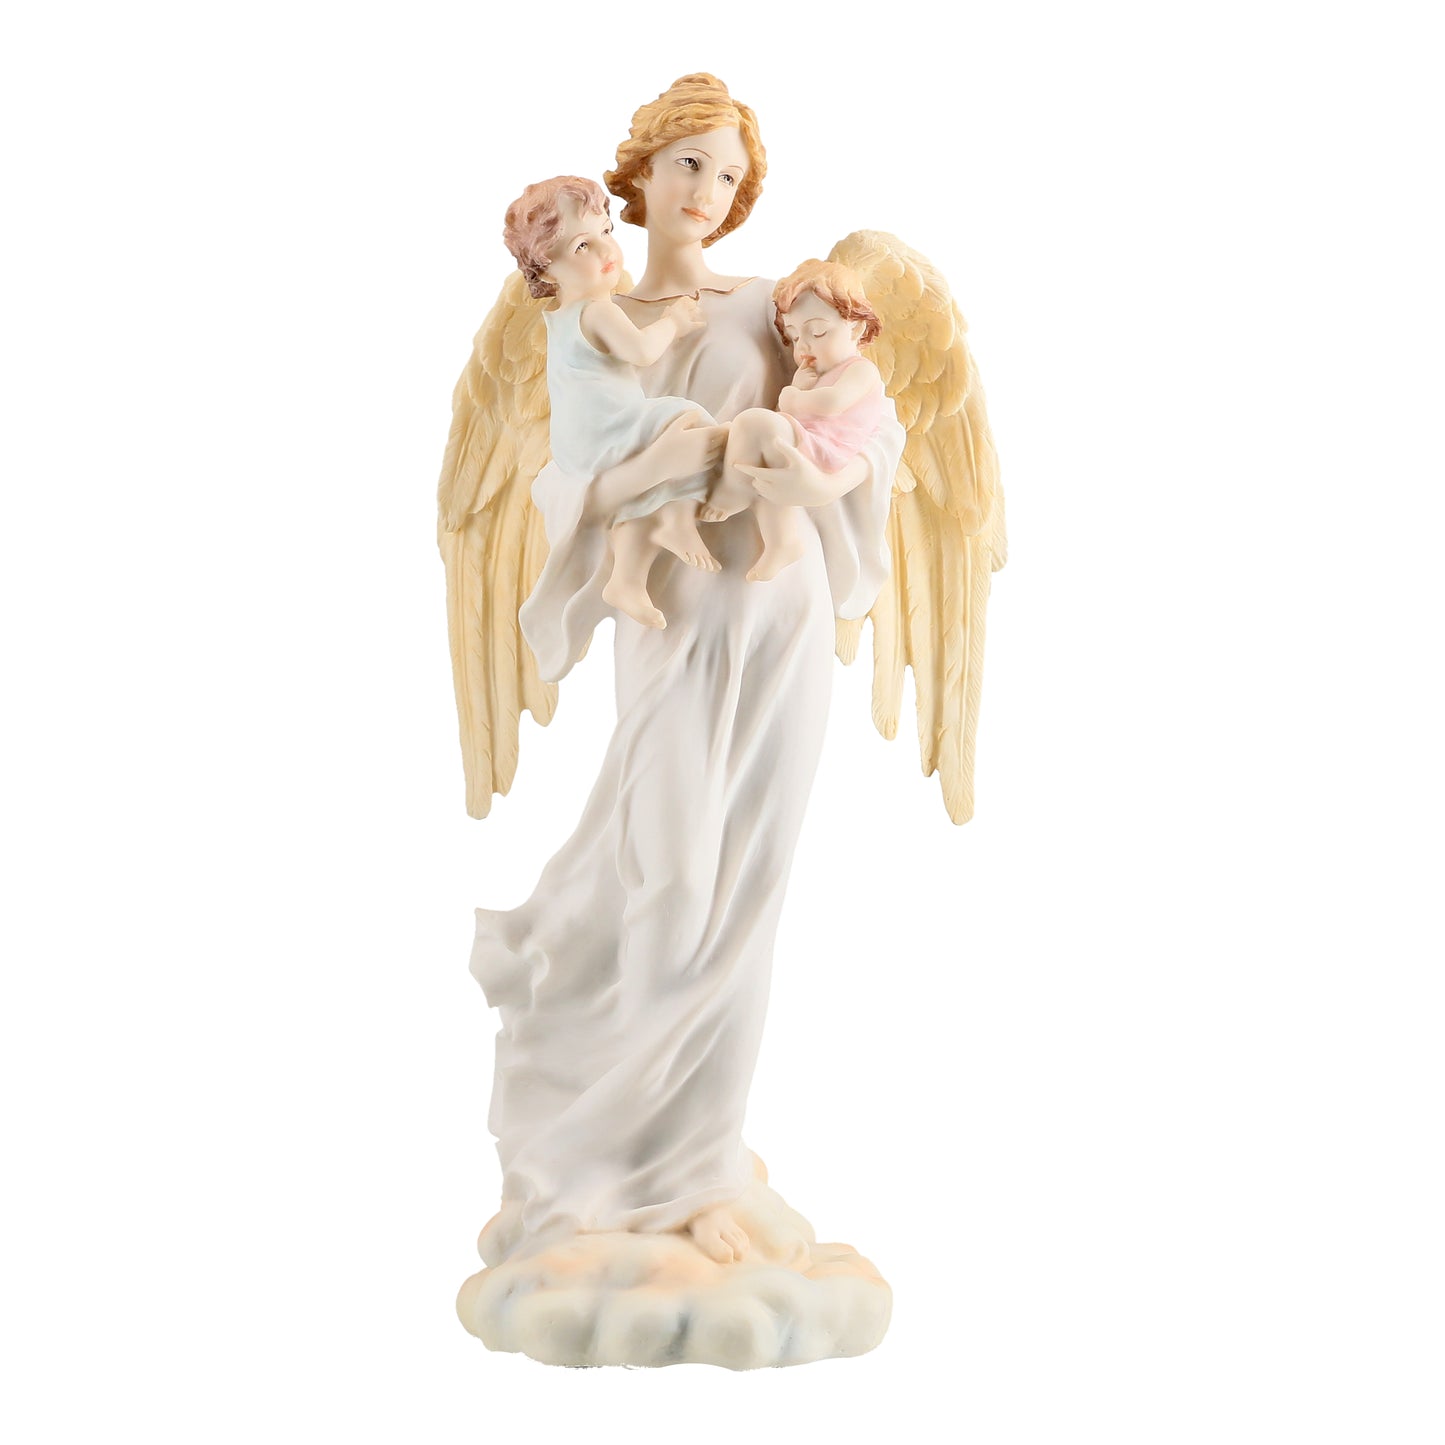 Winged Angel With Boy & Girl in Arms (Veronese Design)